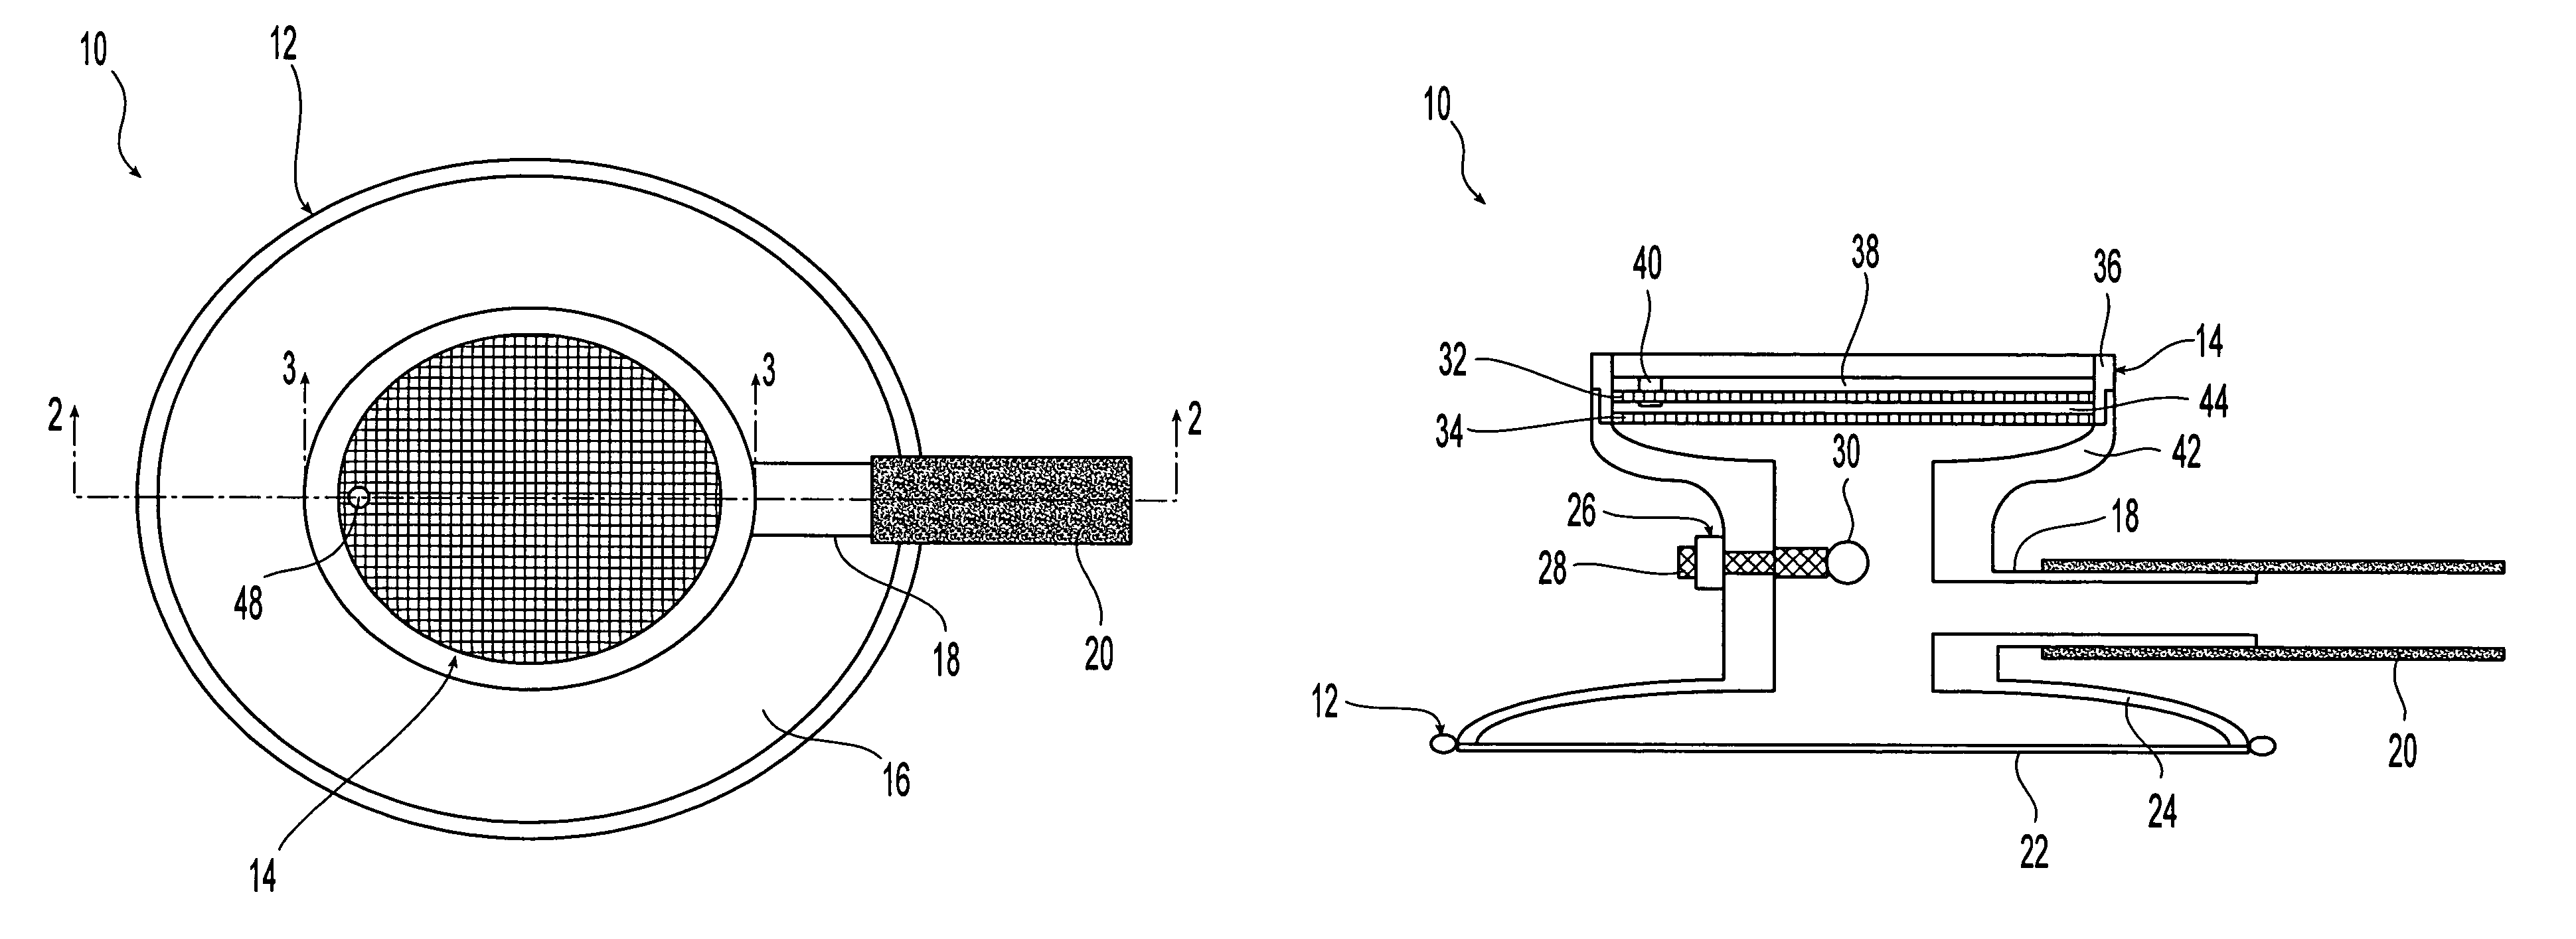 Visual acoustic device